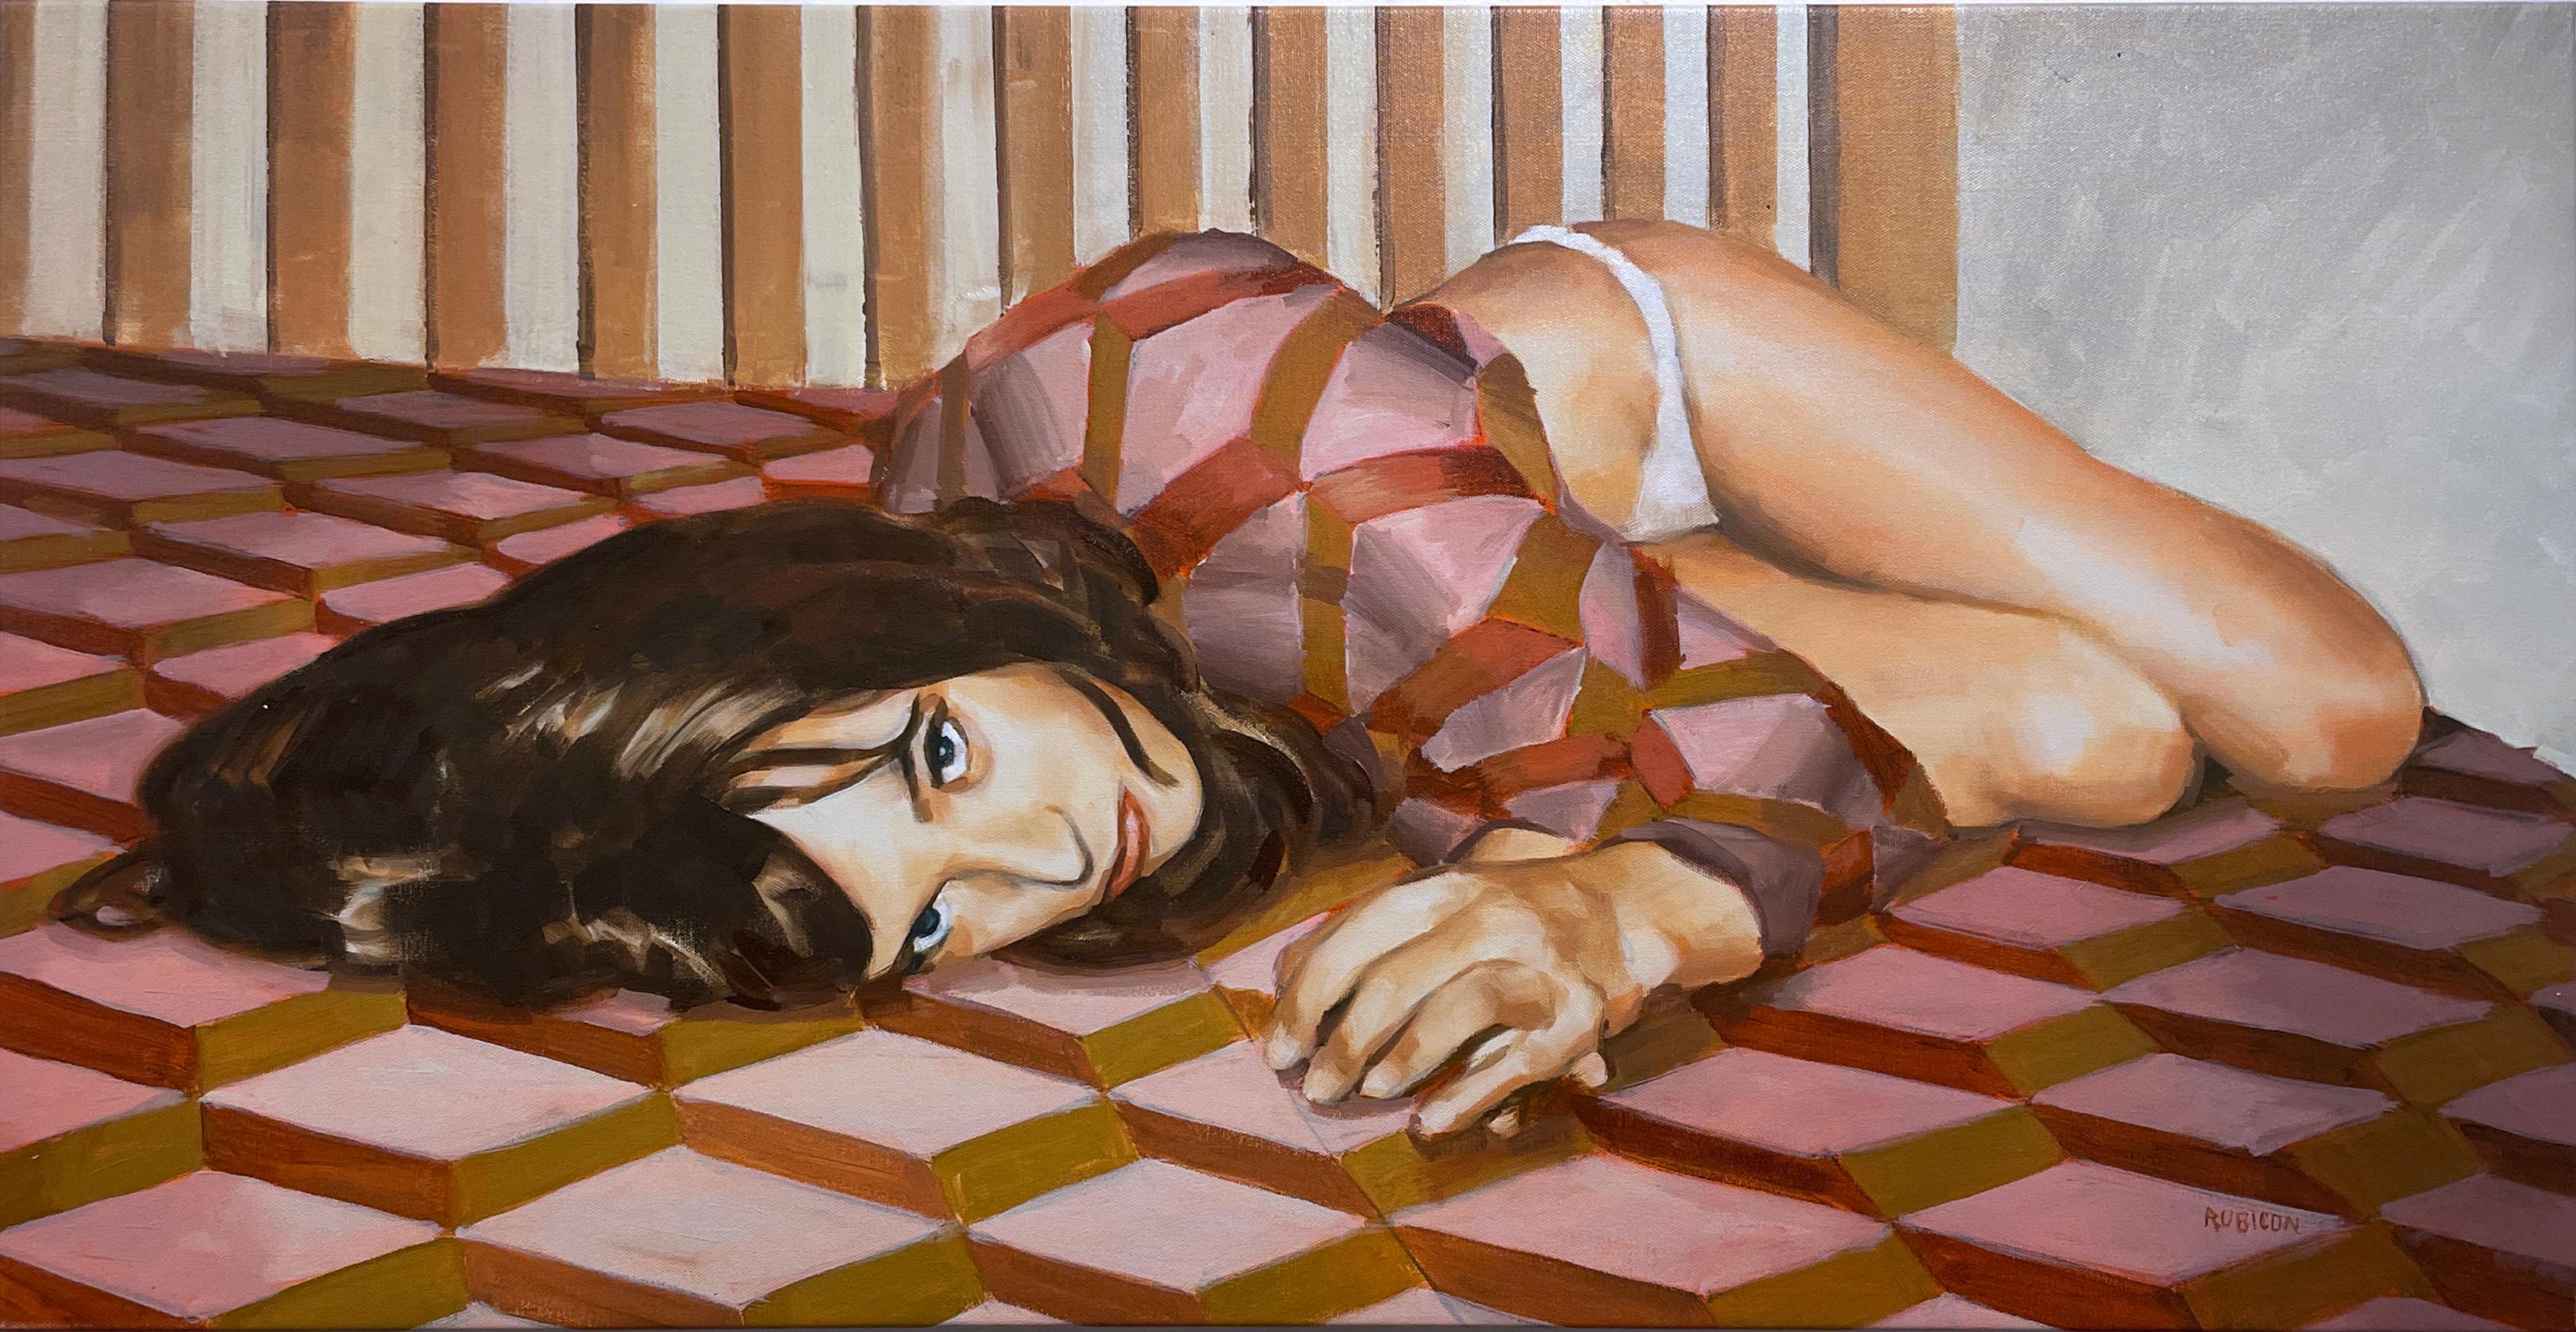 RU8ICON1 Figurative Painting - Sheets (2022) oil on canvas, figurative, woman on bed, pink & gold brown pattern